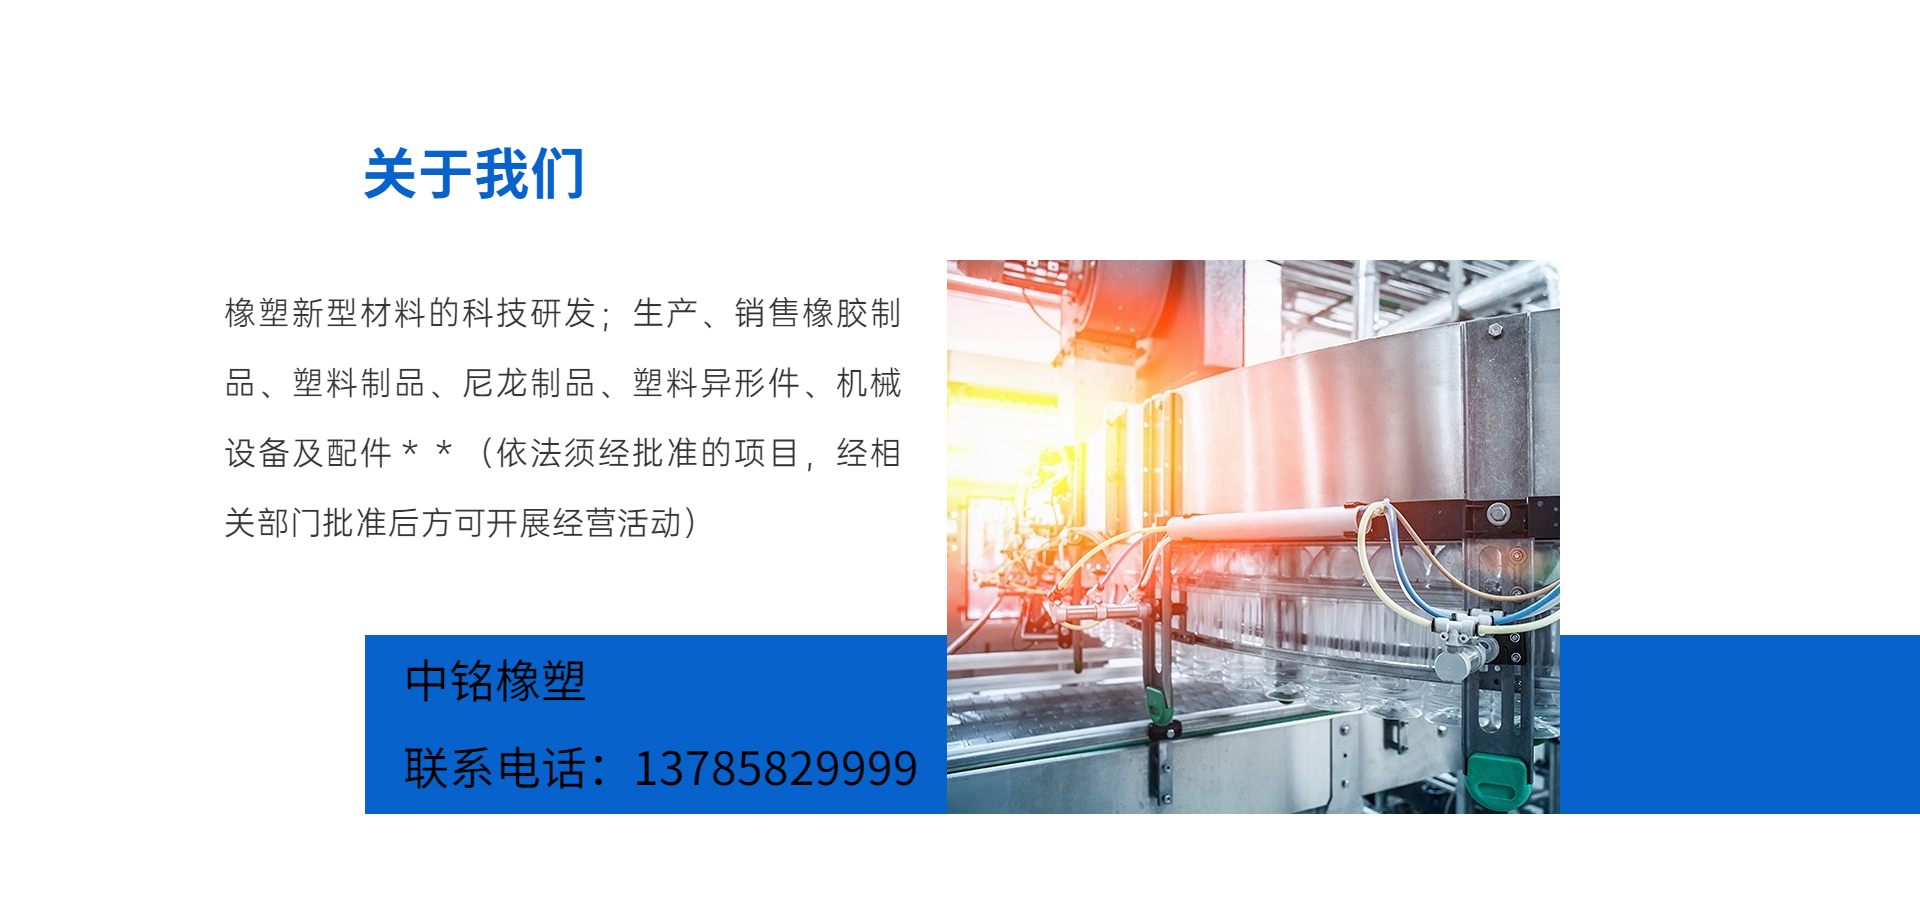 MC nylon pulley roller wear-resistant self-lubricating nylon wheel support for processing nylon products according to drawings and samples